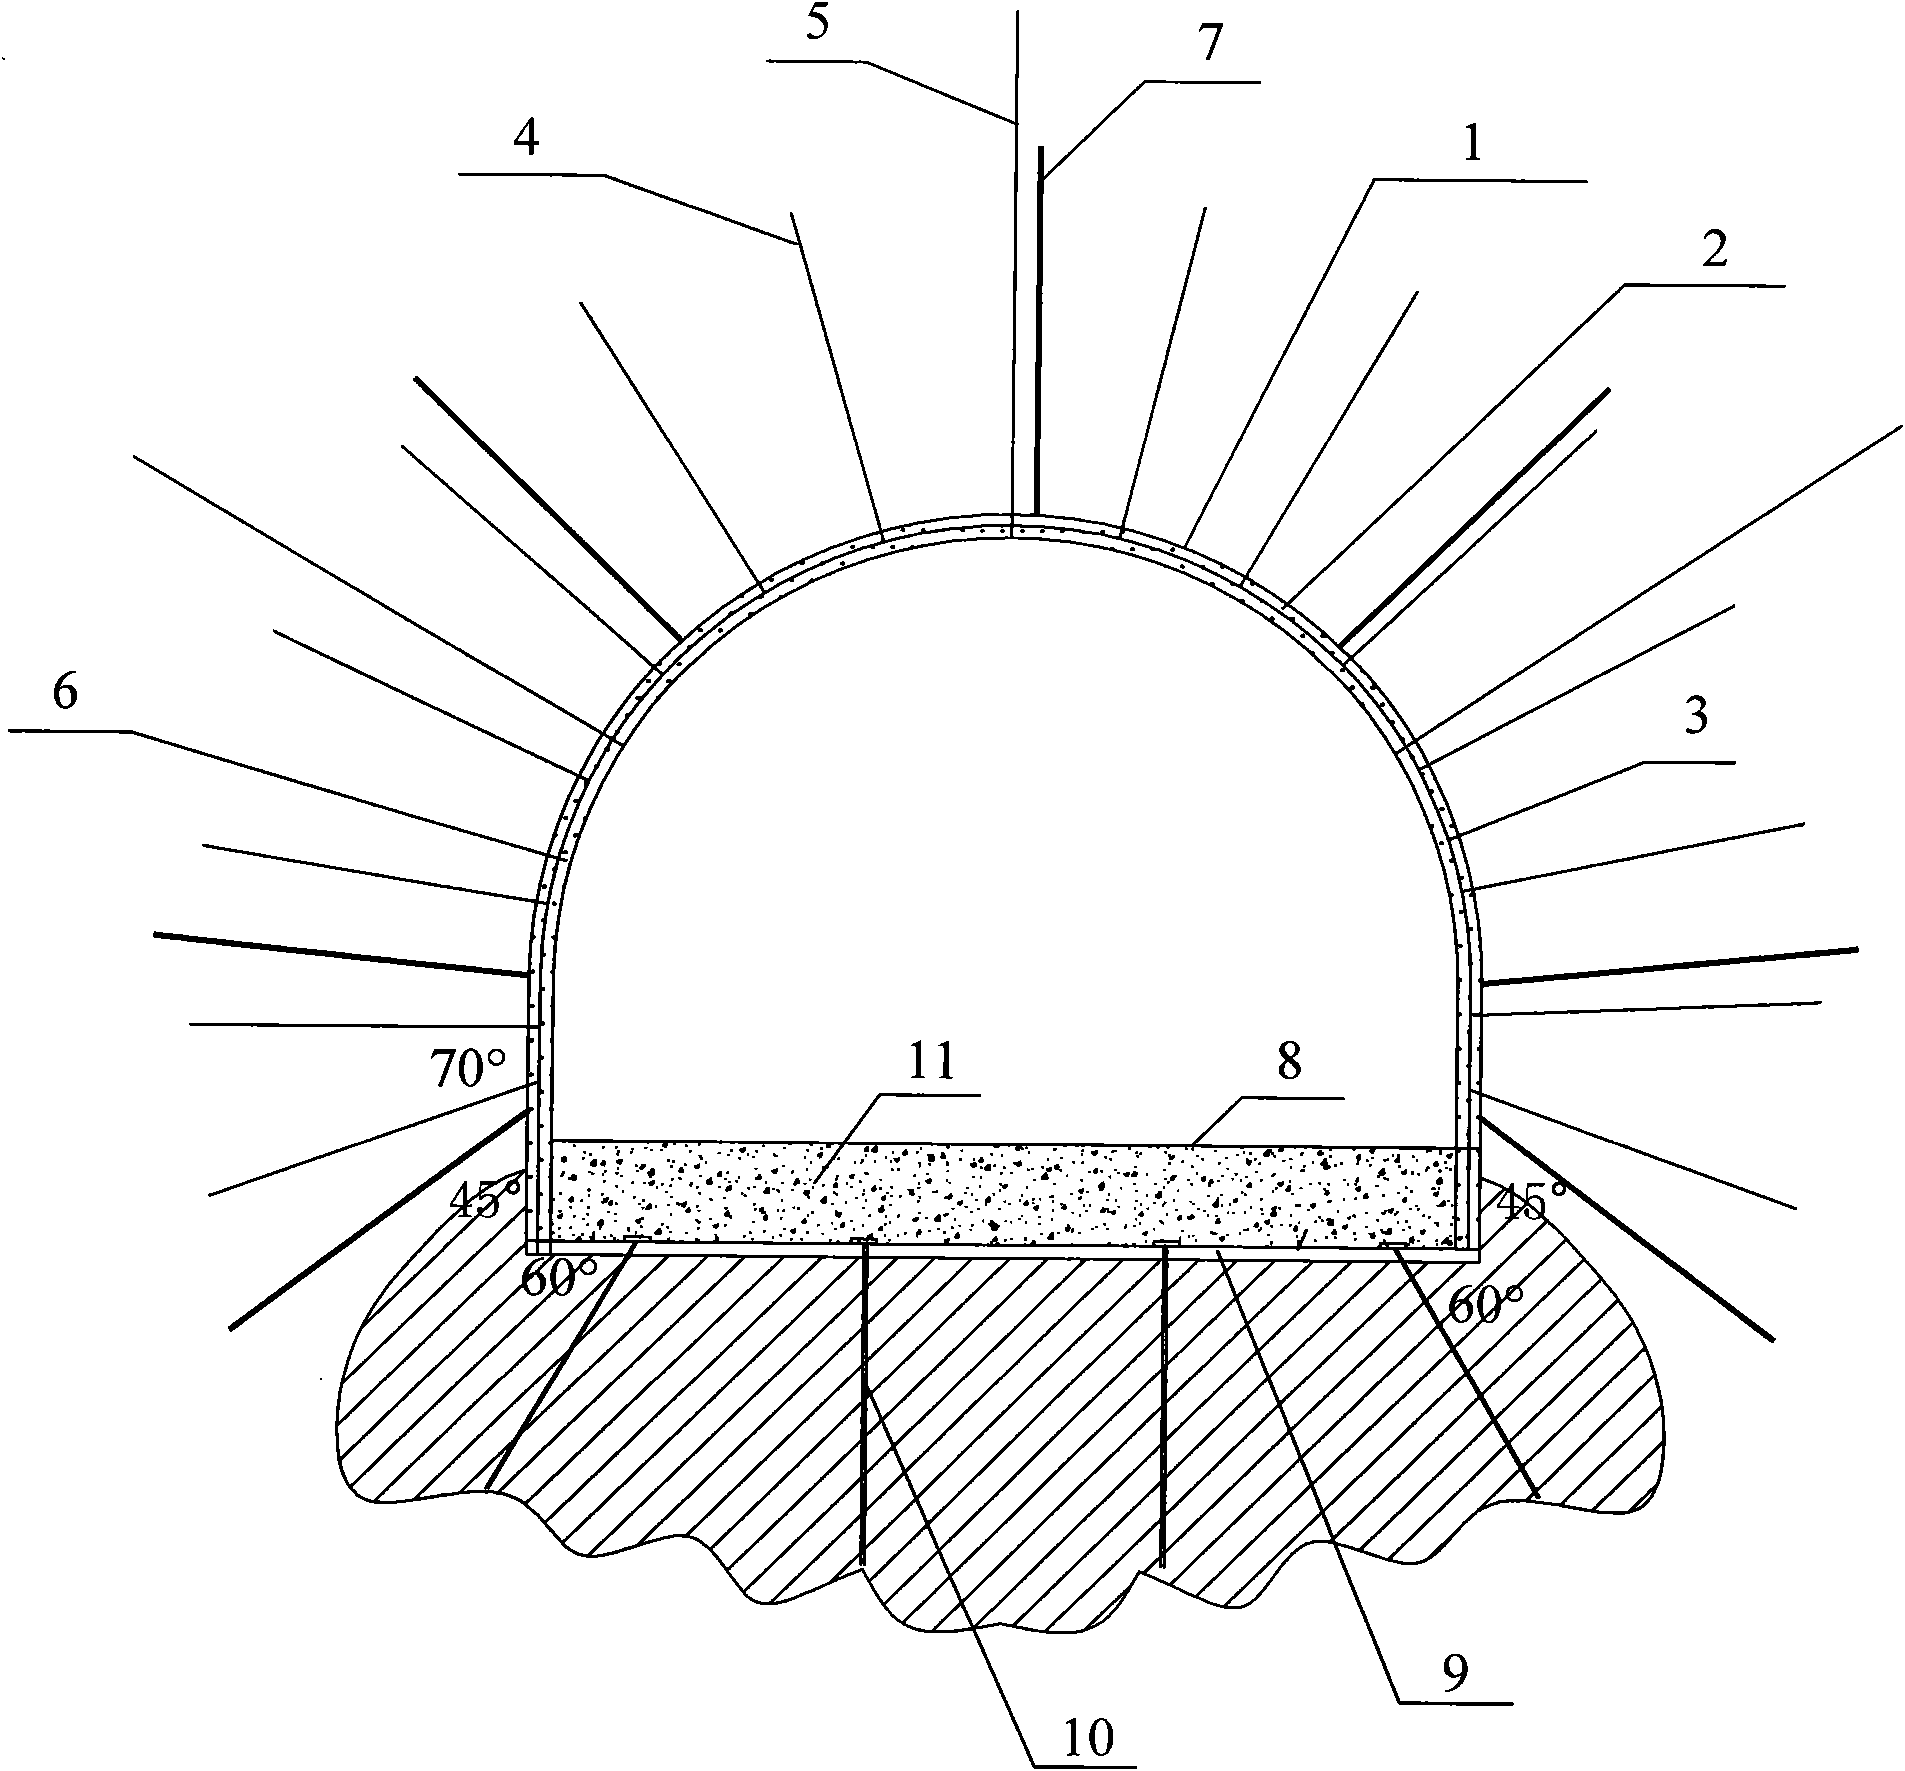 Deep well tunnel cable anchor rigid-flexible coupling support and surrounding rock overall reinforced support method